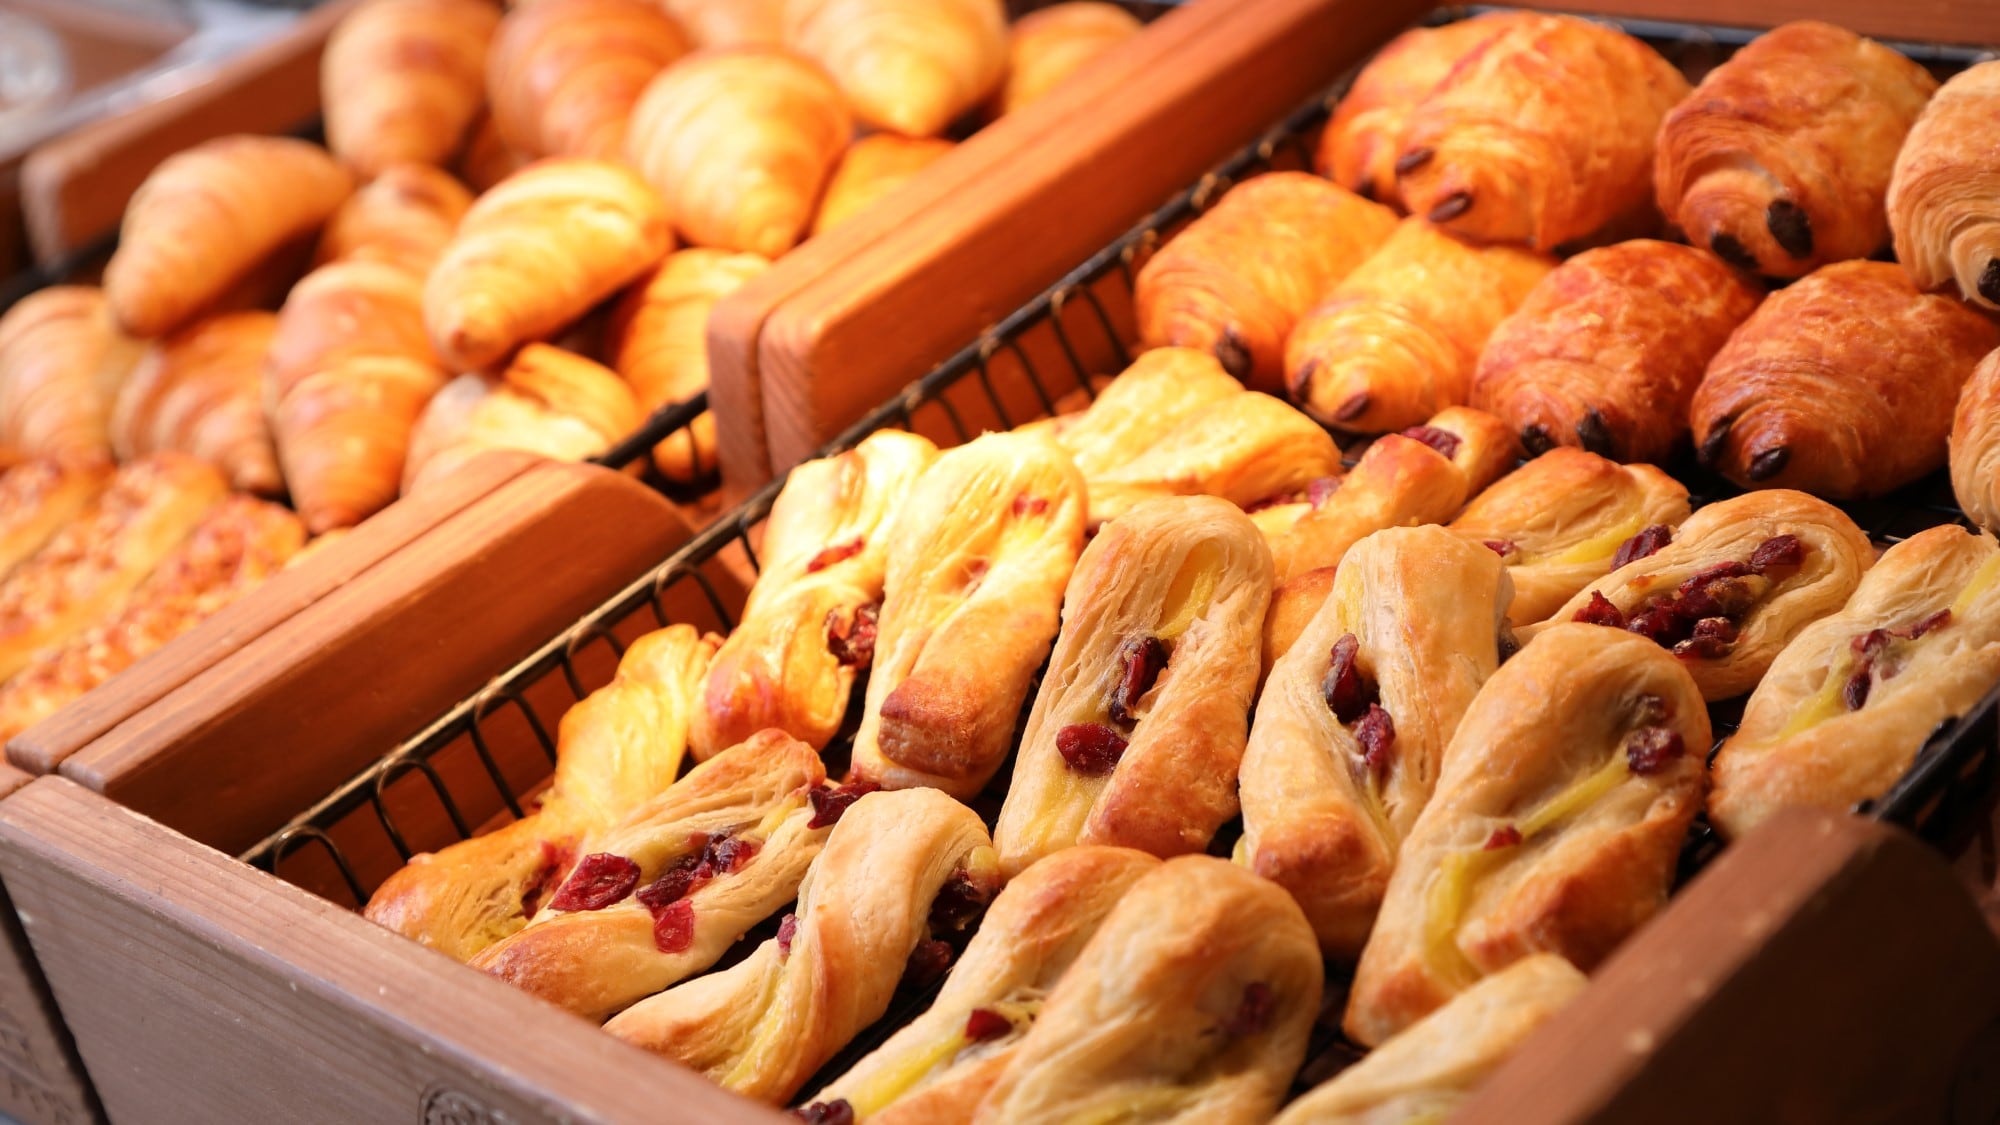 Breakfast buffet example: Bread is baked one by one at the hotel every morning with great care.